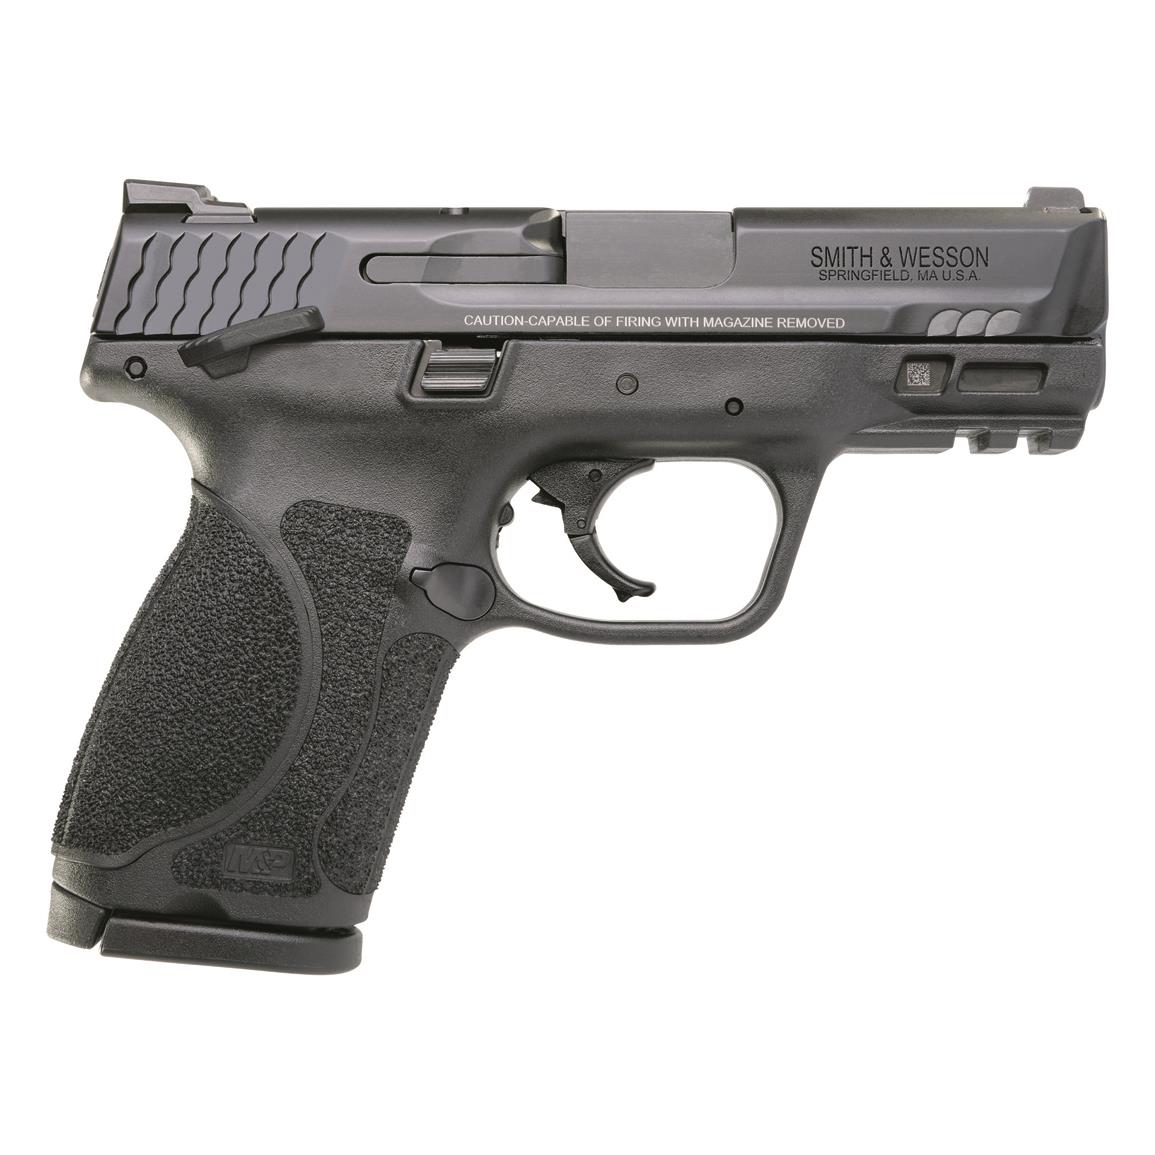 Smith & Wesson M&P9 M2.0 Compact, Semi-Automatic, 9mm, 3.6" Barrel, Manual Thumb Safety, 15+1 Rounds